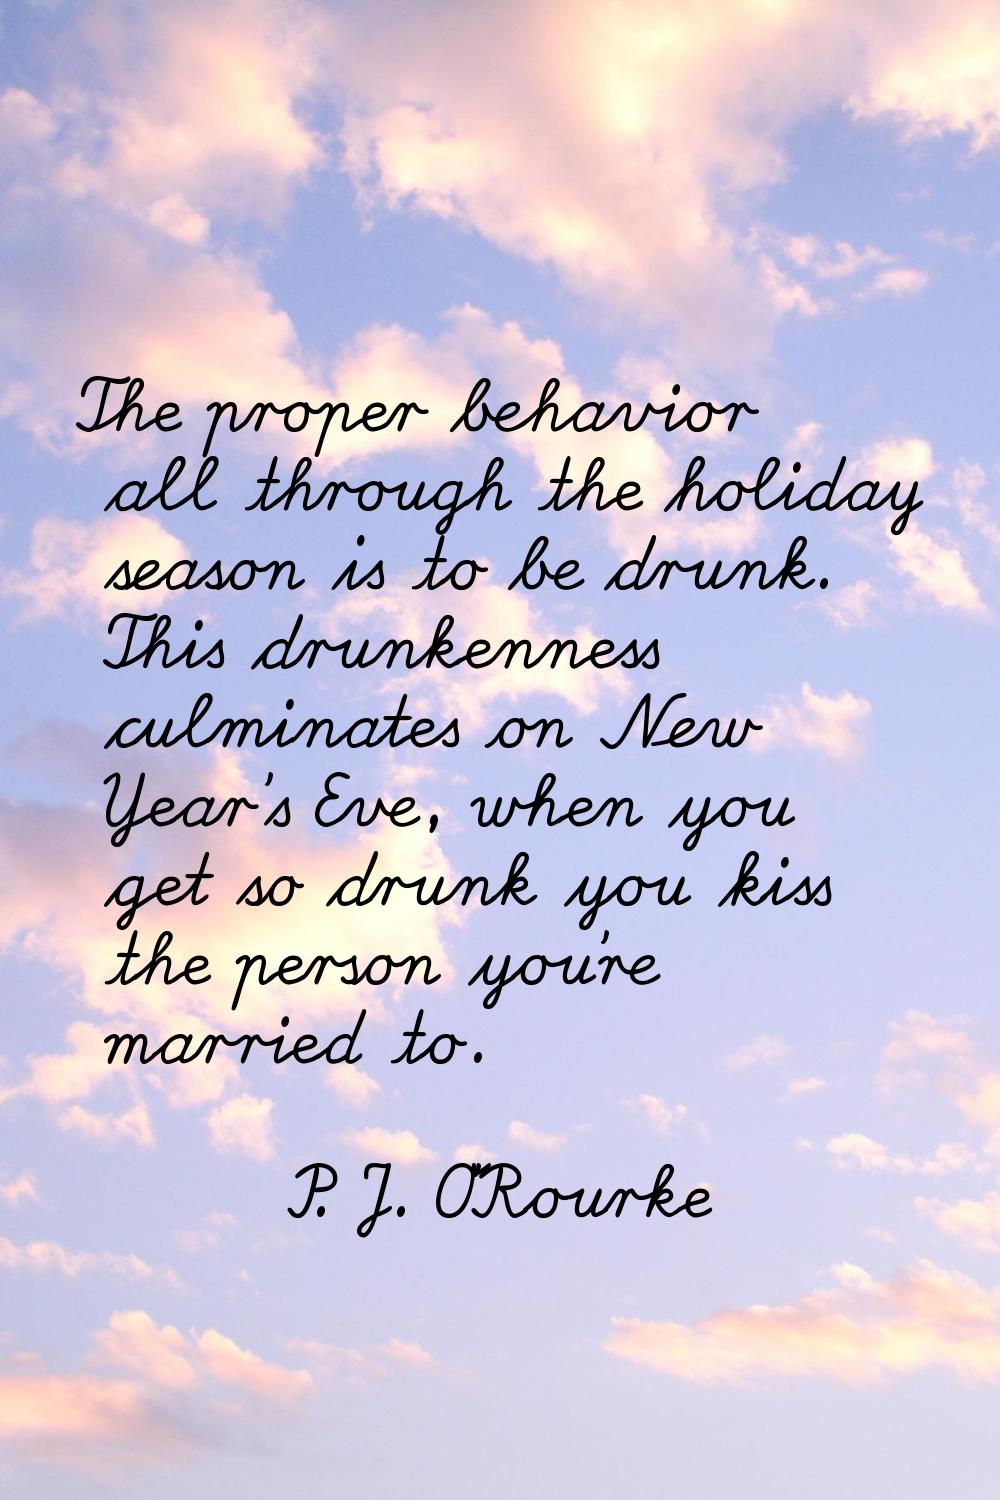 The proper behavior all through the holiday season is to be drunk. This drunkenness culminates on N